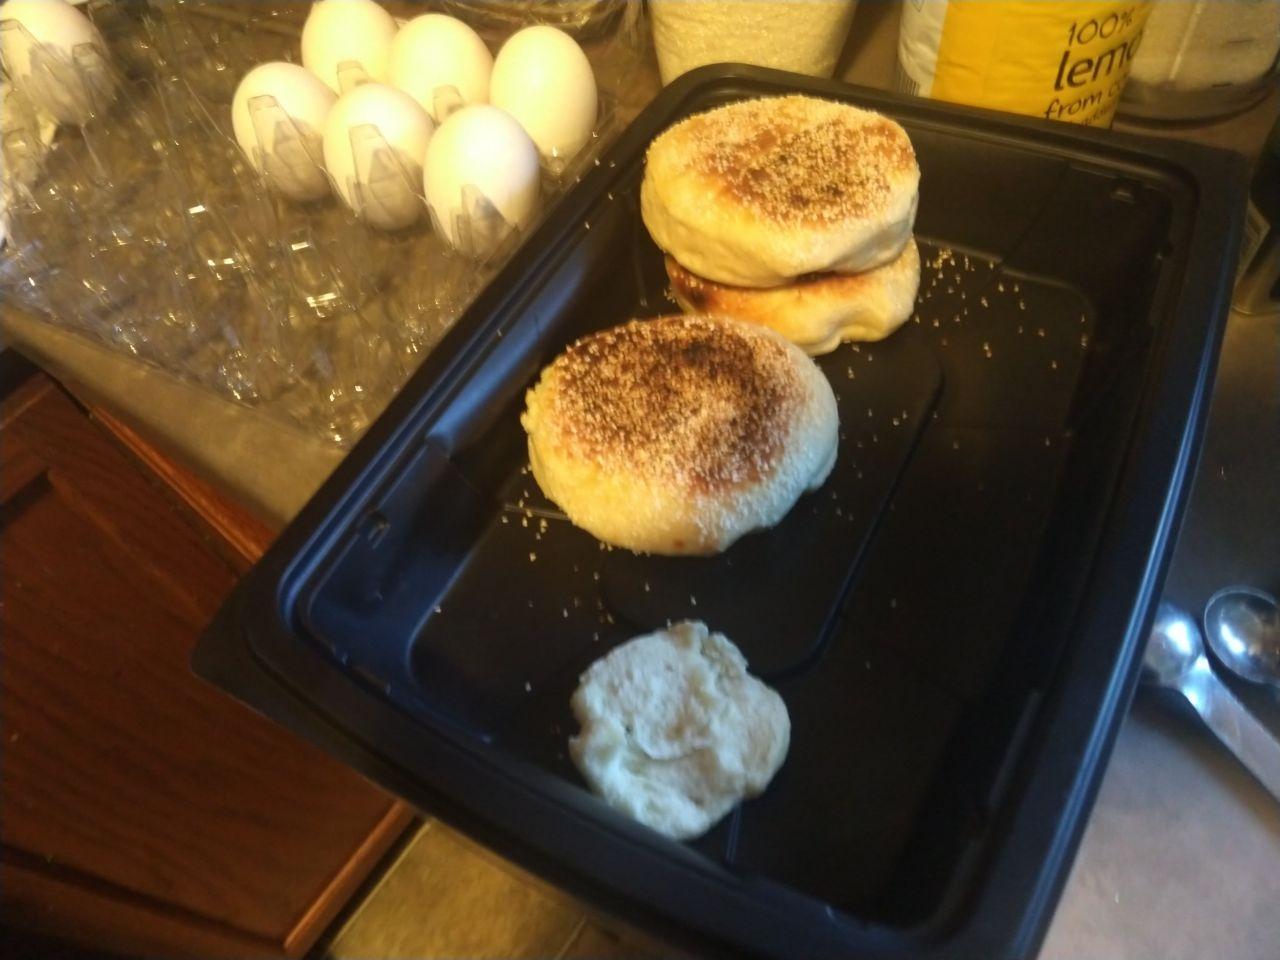 English muffins after cooking.